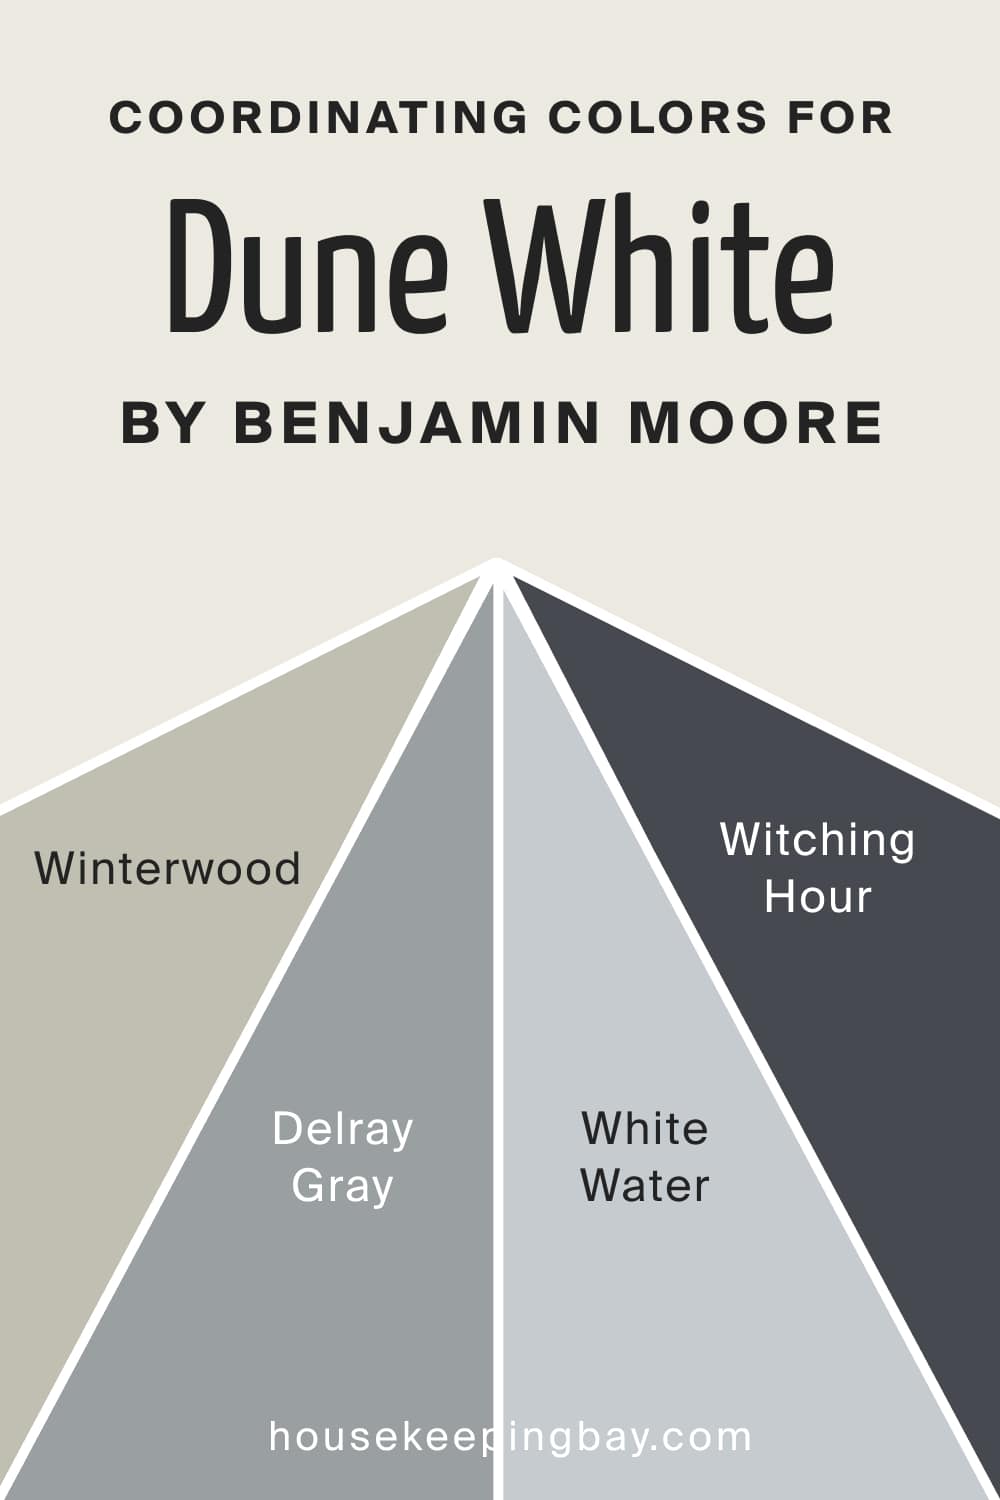 Coordinating Colors for Dune White 968 by Benjamin Moore